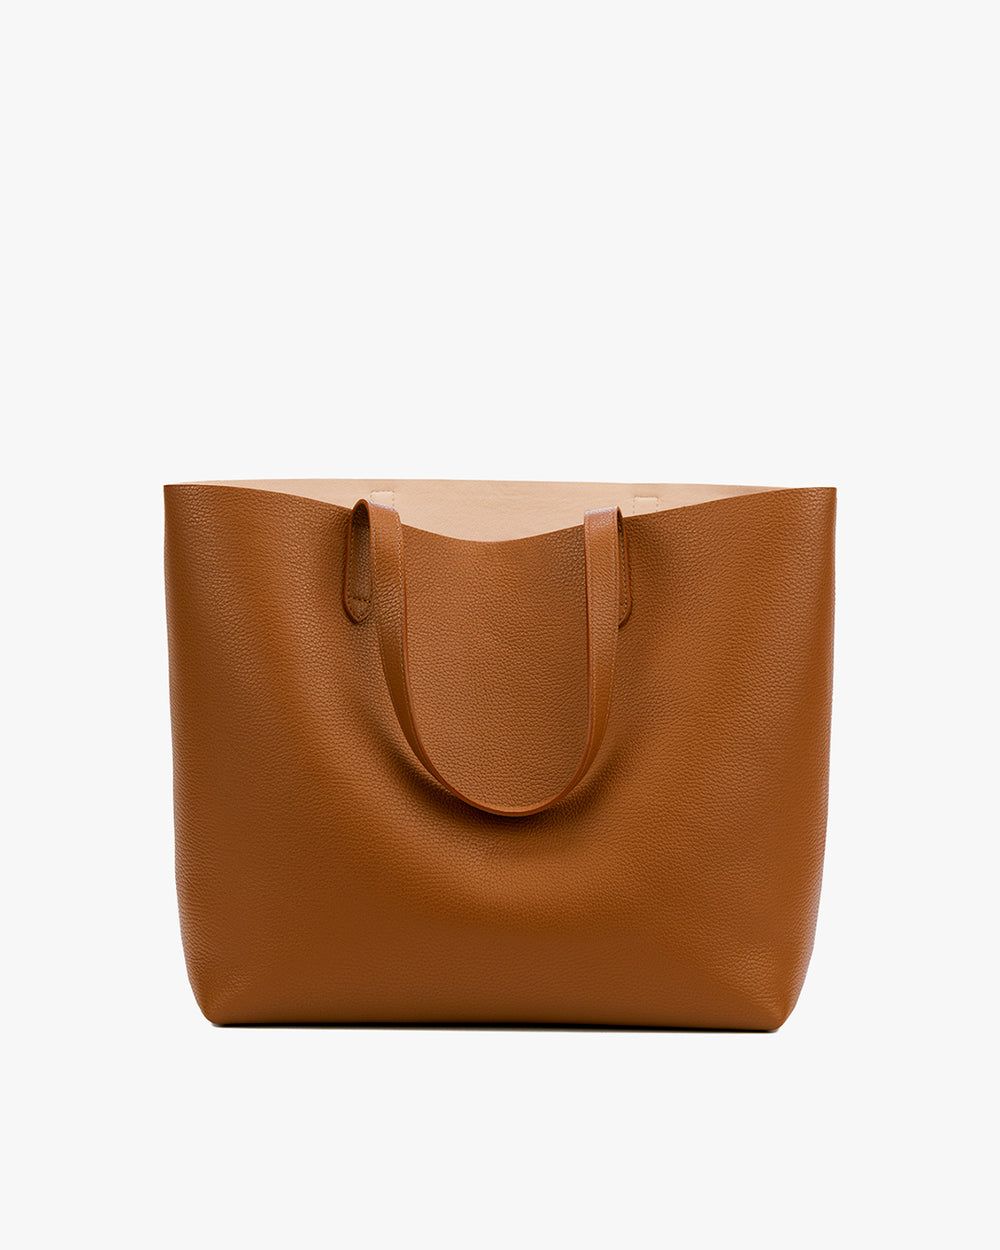 Blush Leather Large Ivy Tote Bag | Lulu Guinness